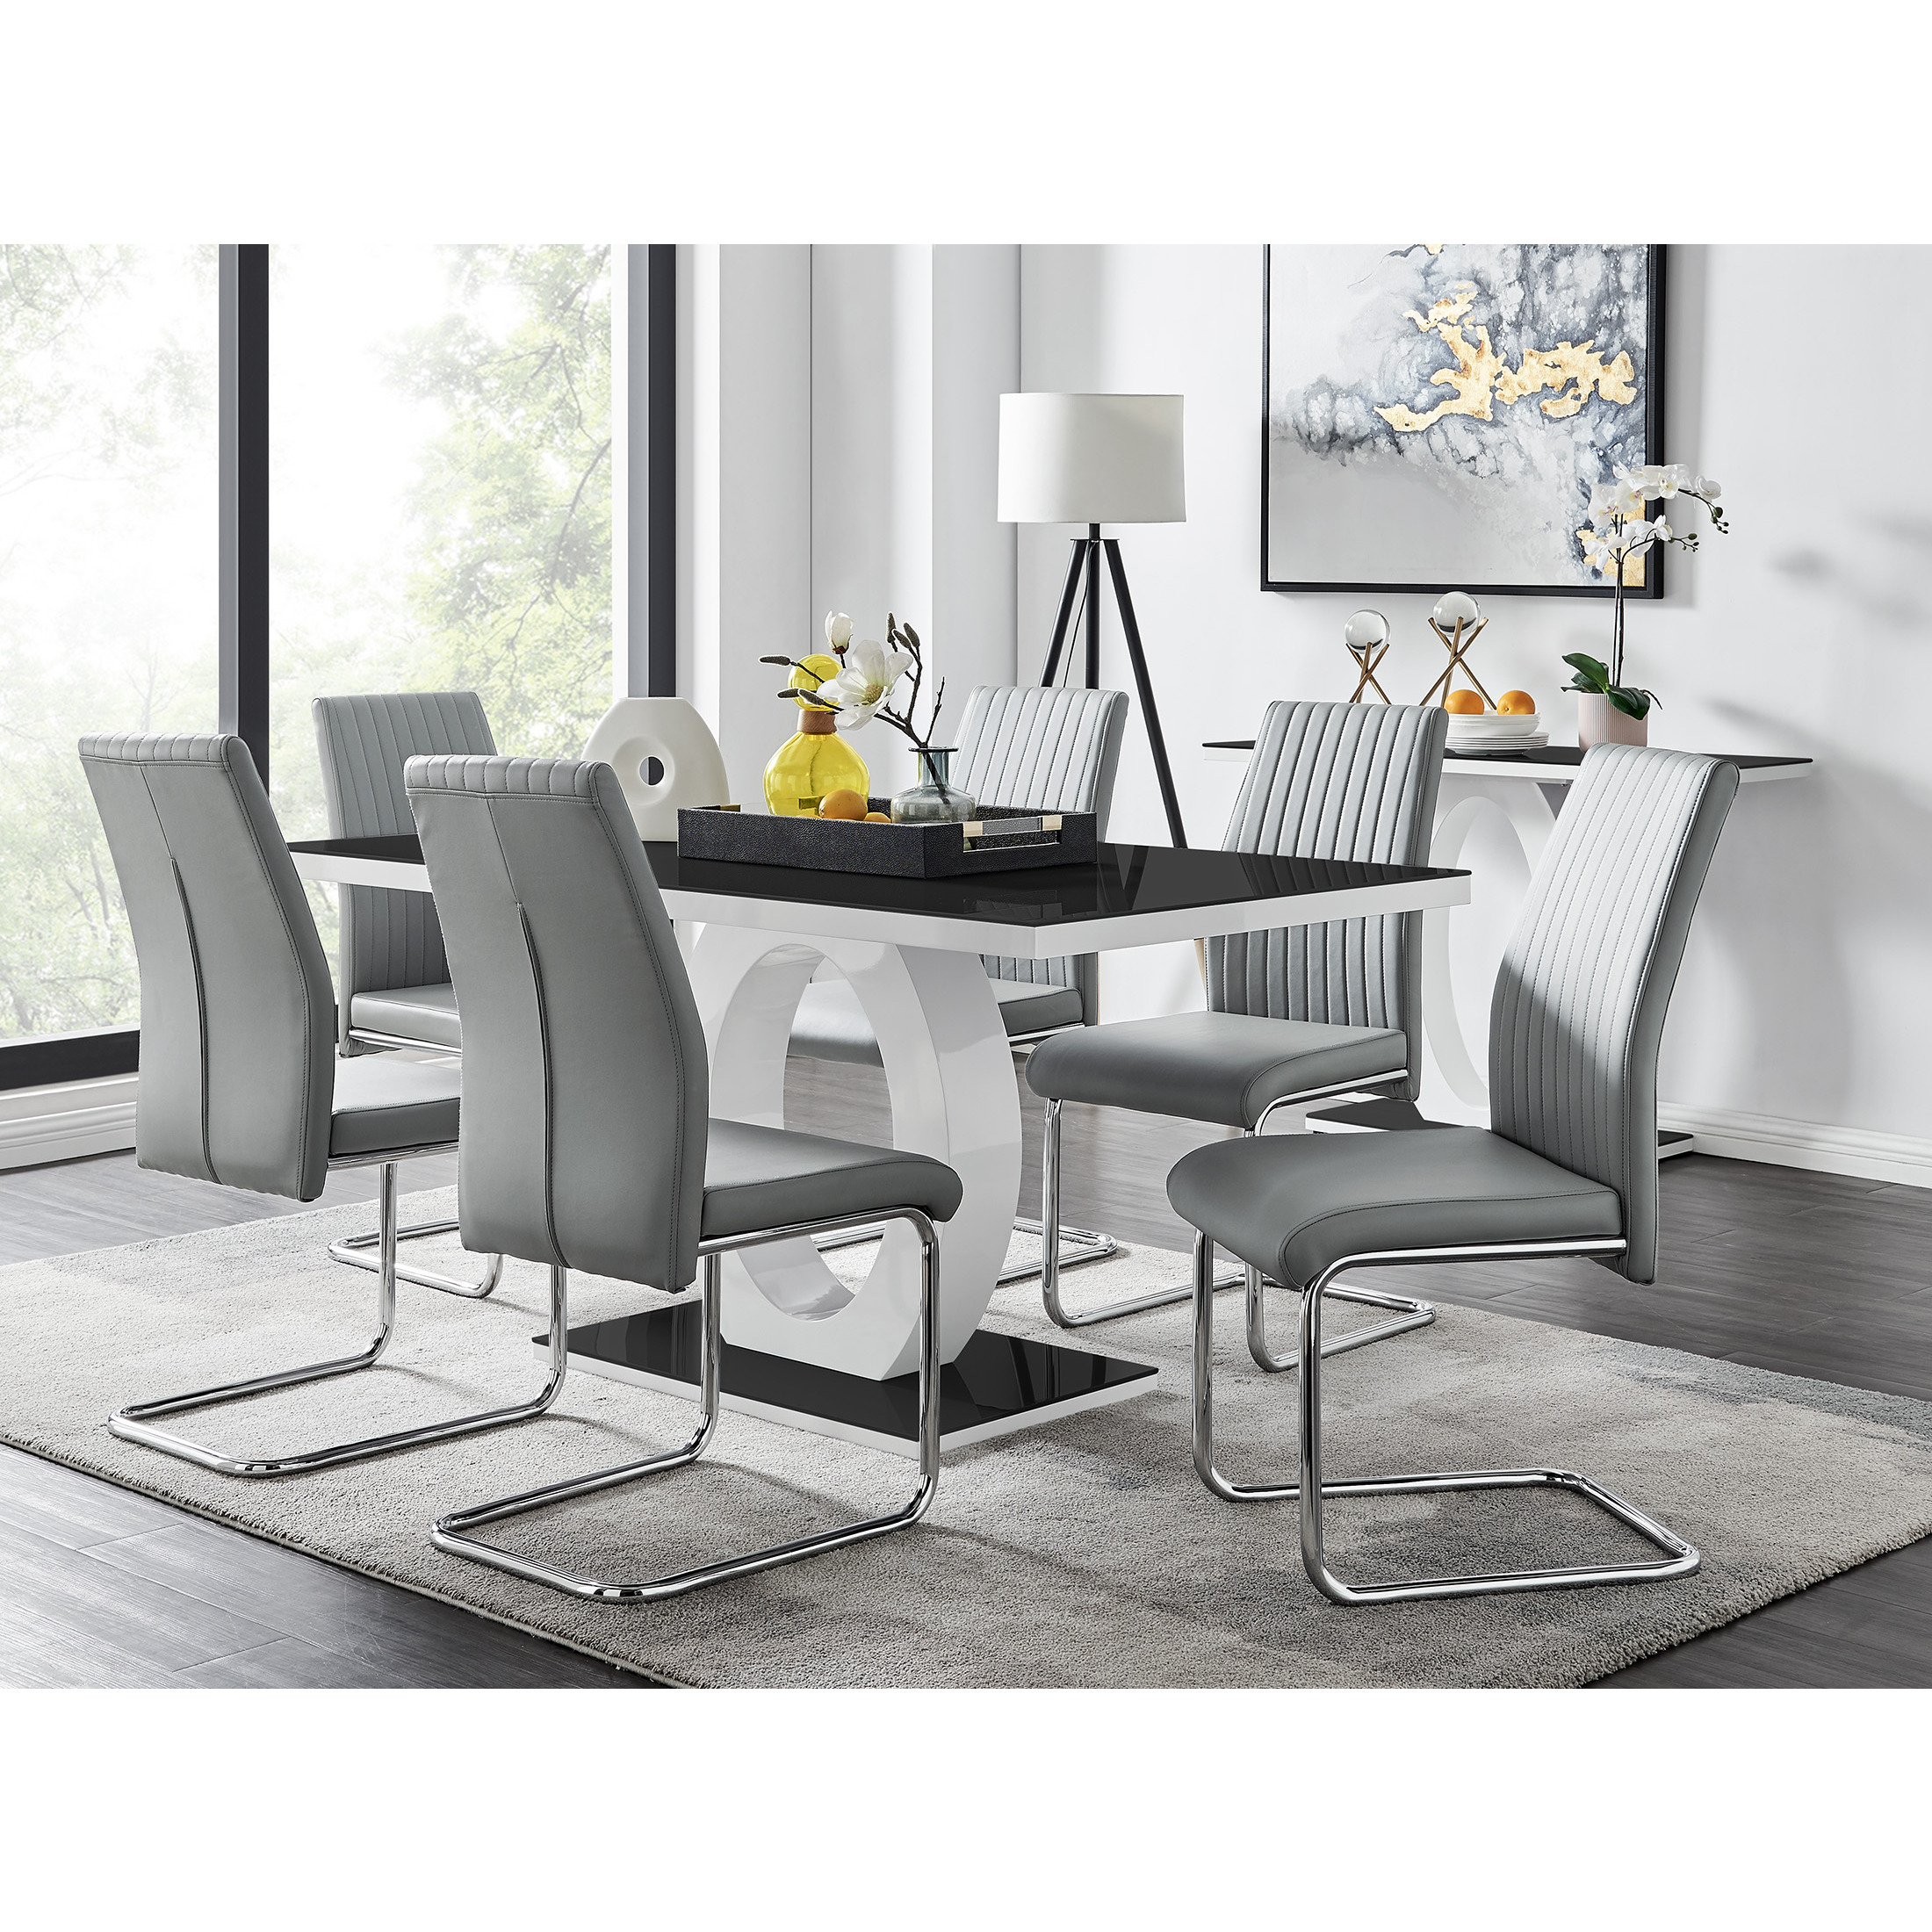 Giovani High Gloss And Glass Dining Table And 6 Lorenzo Chairs Set